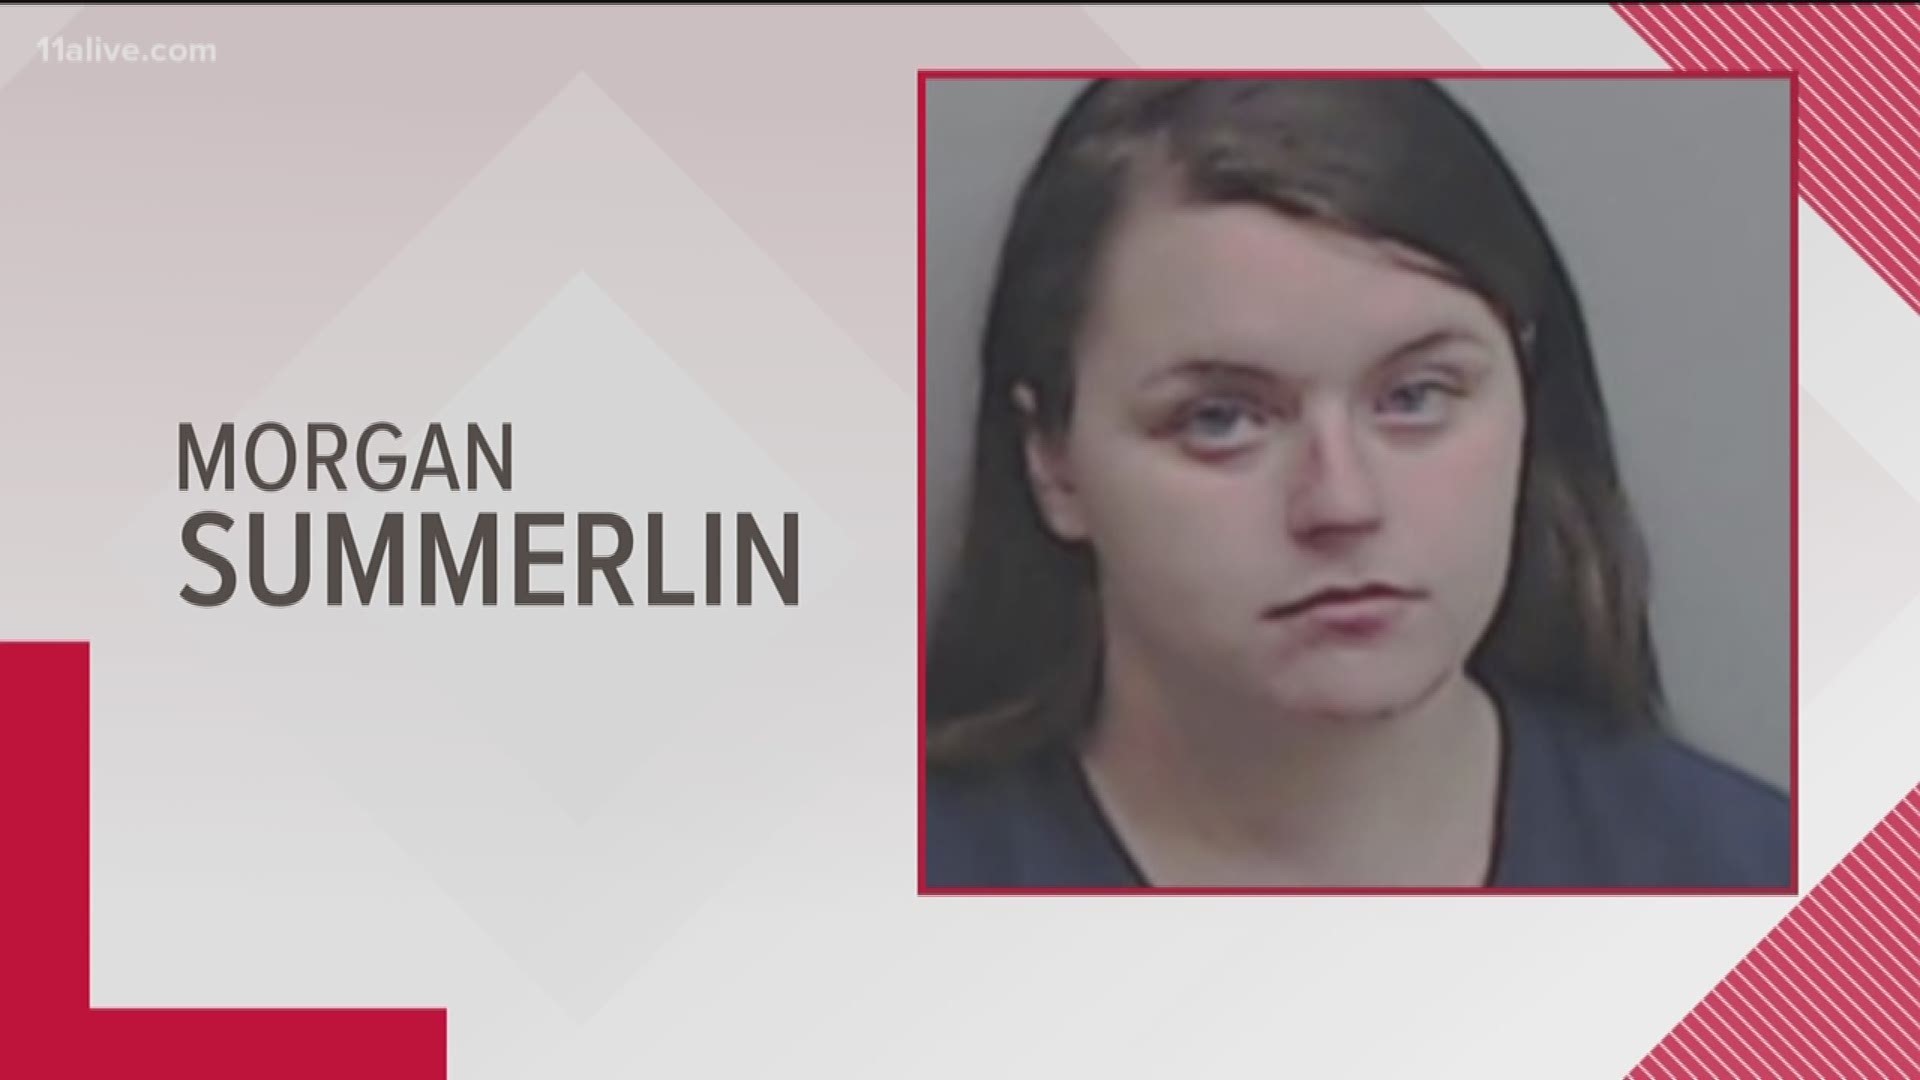  A 25-year-old mother who pleaded guilty in Fulton Superior Court for allowing two men to rape her two young daughters in exchange for cash was sentenced to 20 years in prison.